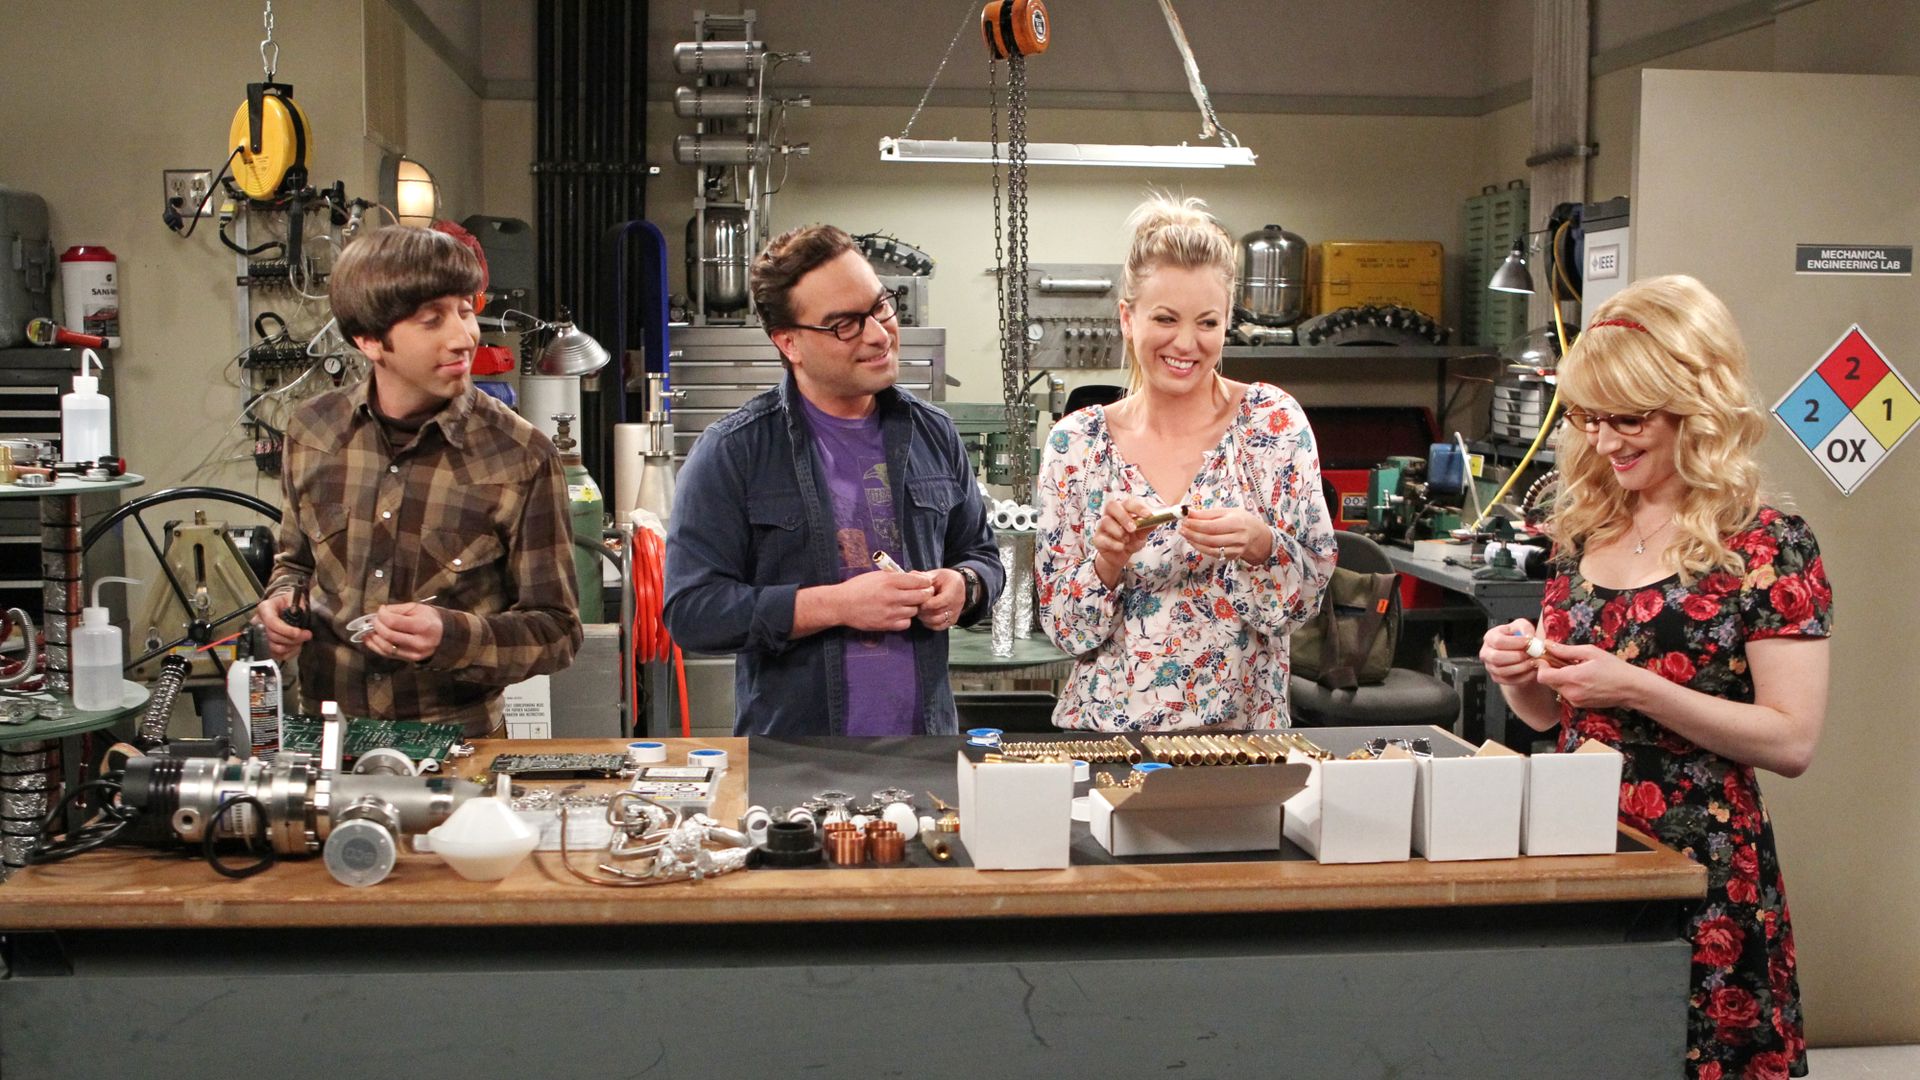 Screen grab from "The Solder Excursion Diversion" episode from The Big Bang Theory